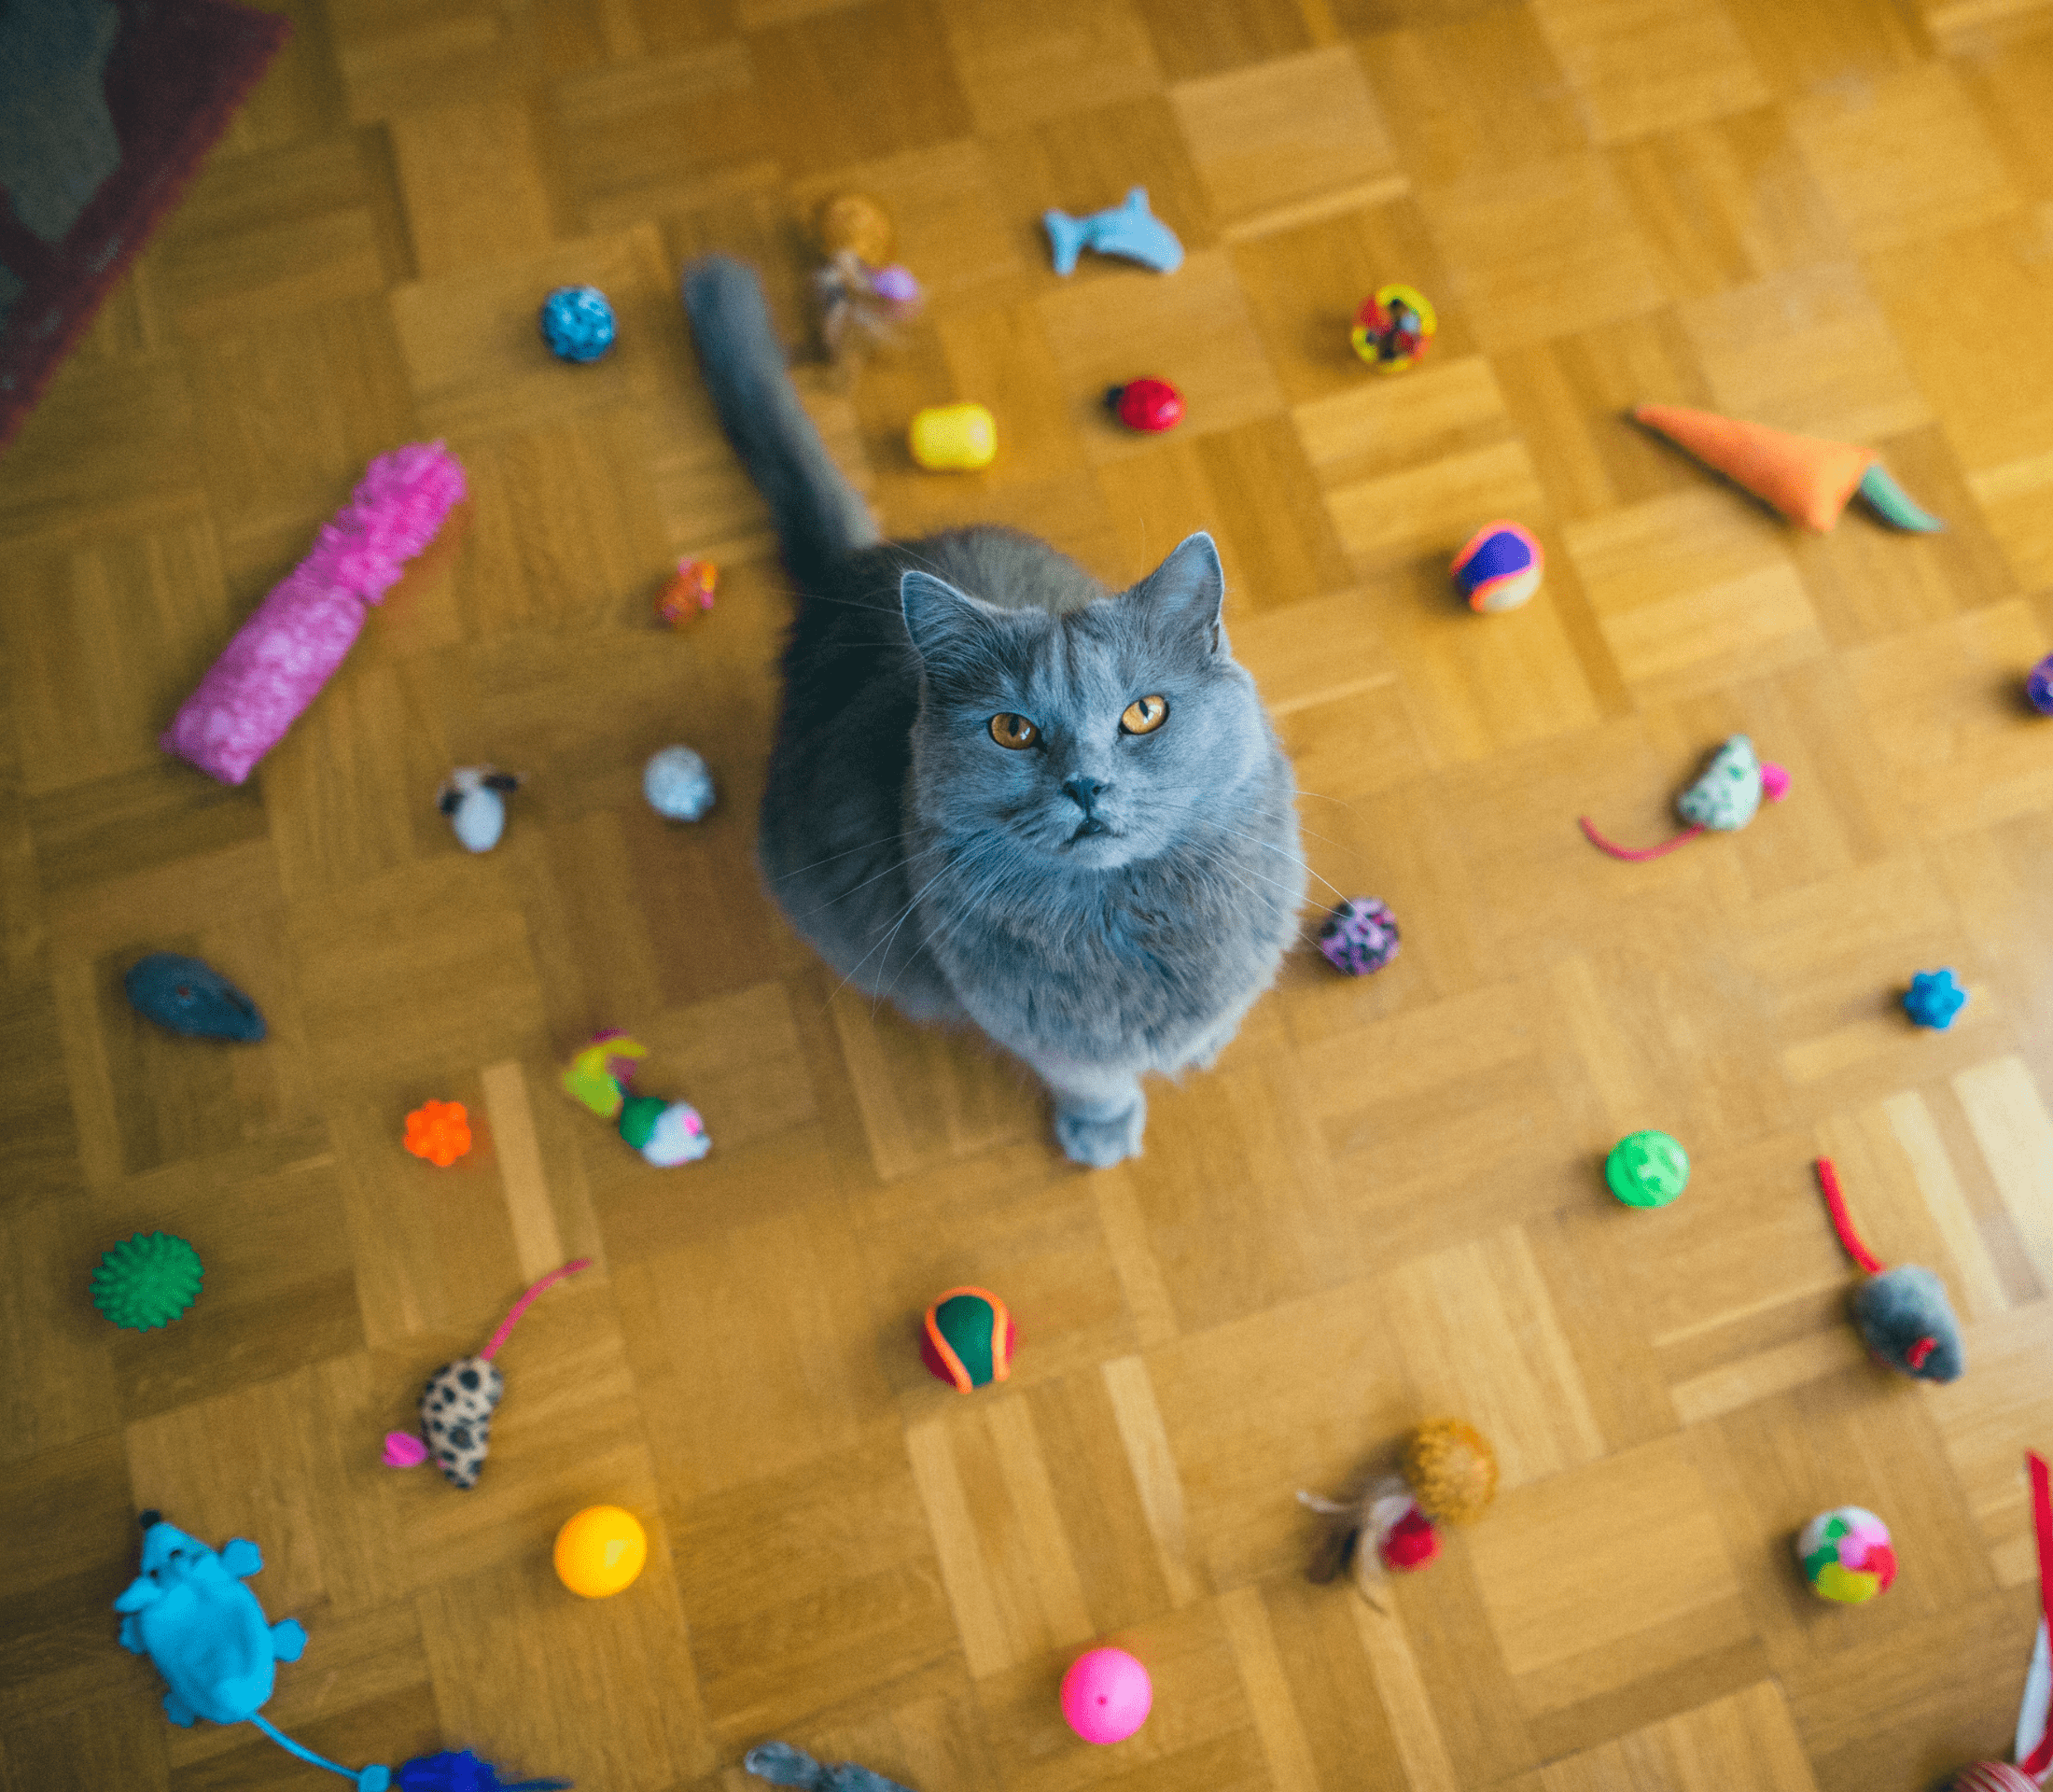 Gray cat with cat toys around scattered on brown floor